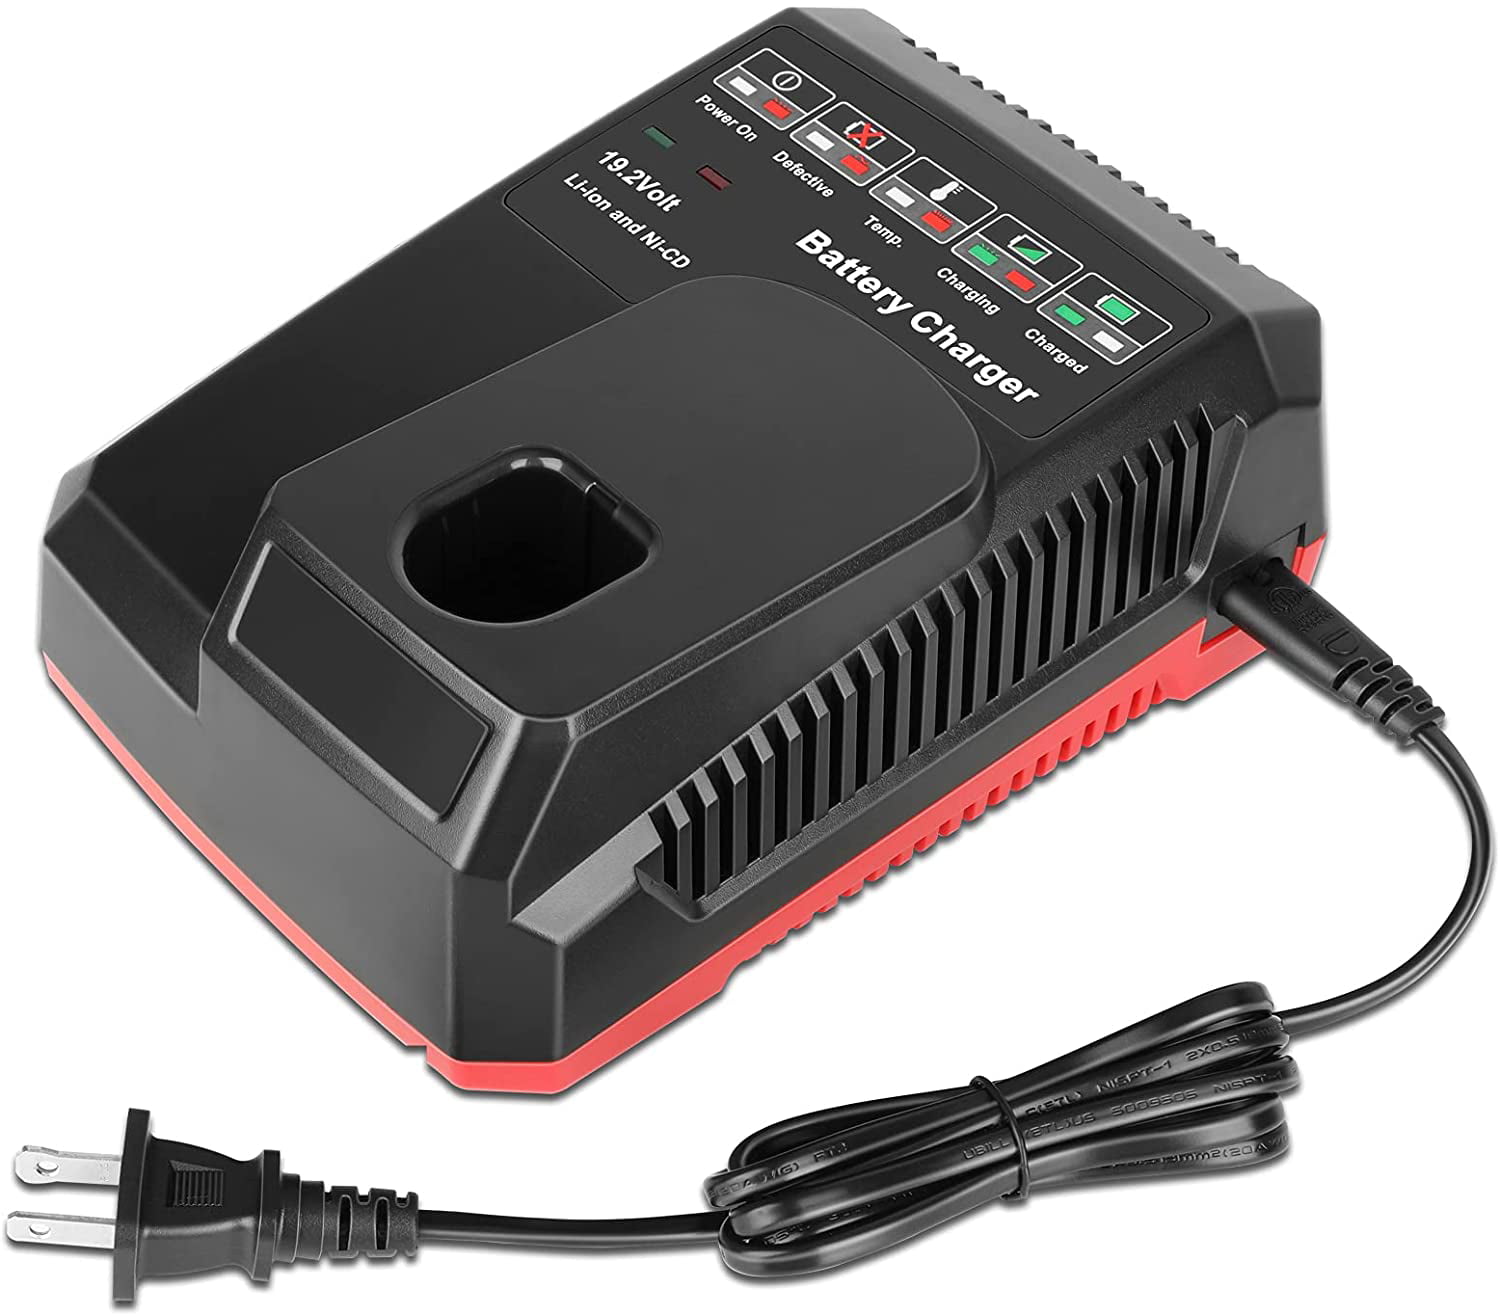 19.2 Volt XCP For Craftsman C3 Lithium Battery /Charger PP2011 11375 130279005 